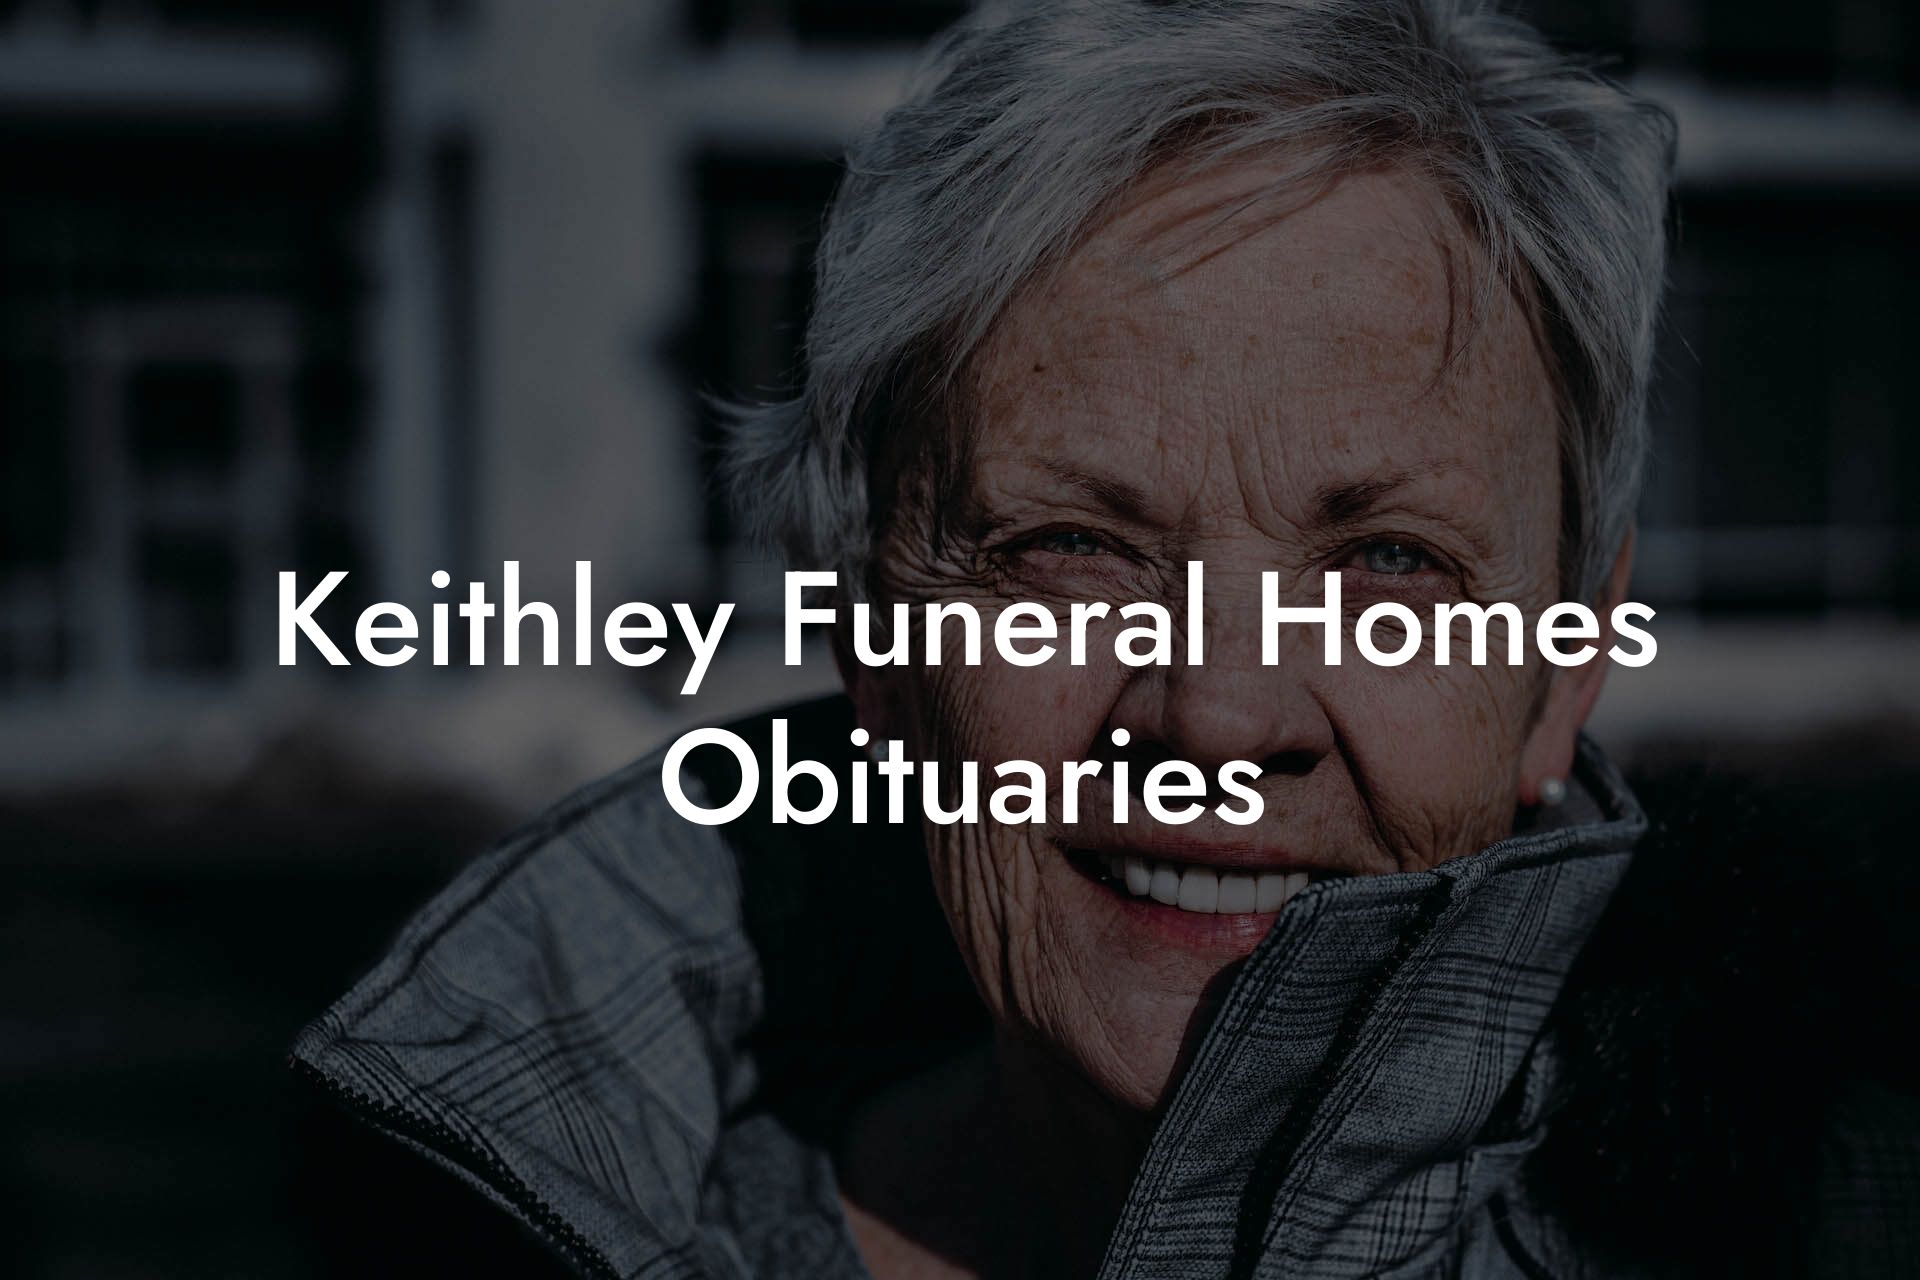 Keithley Funeral Homes Obituaries